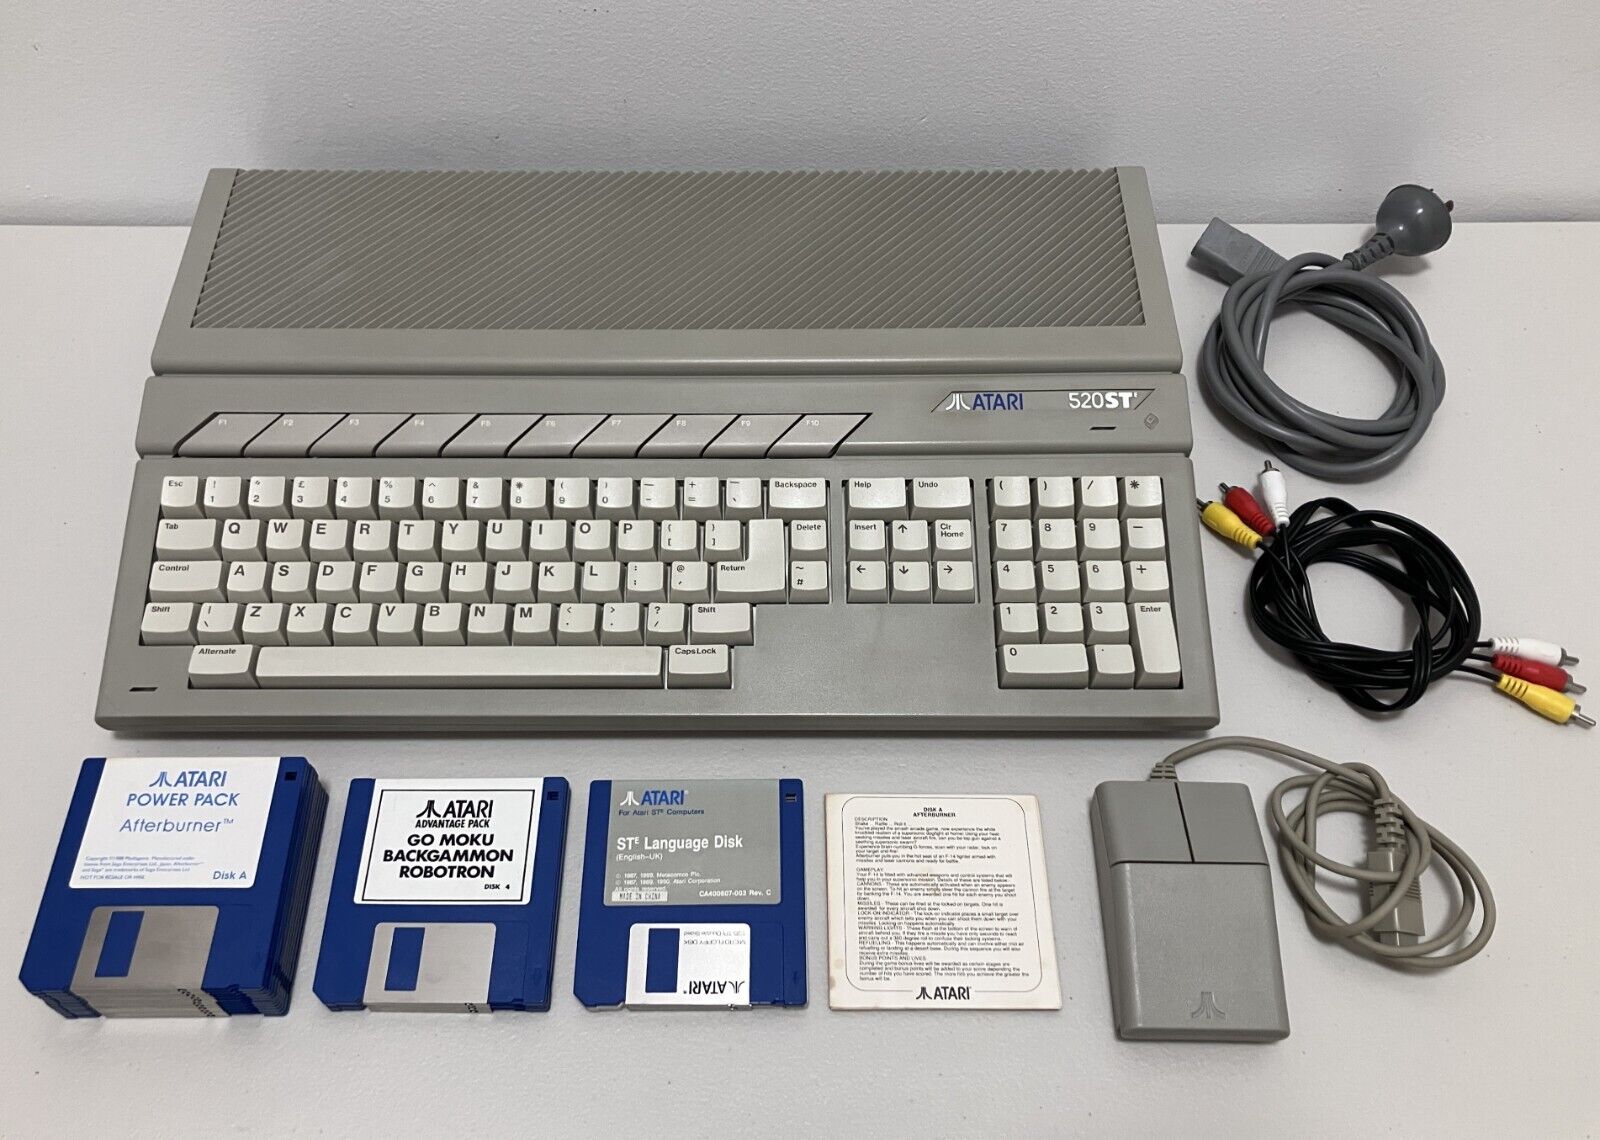 Retro Atari 520 STe Computer - STM1 Mouse, Game Floppy Disks - GREAT CONDITION